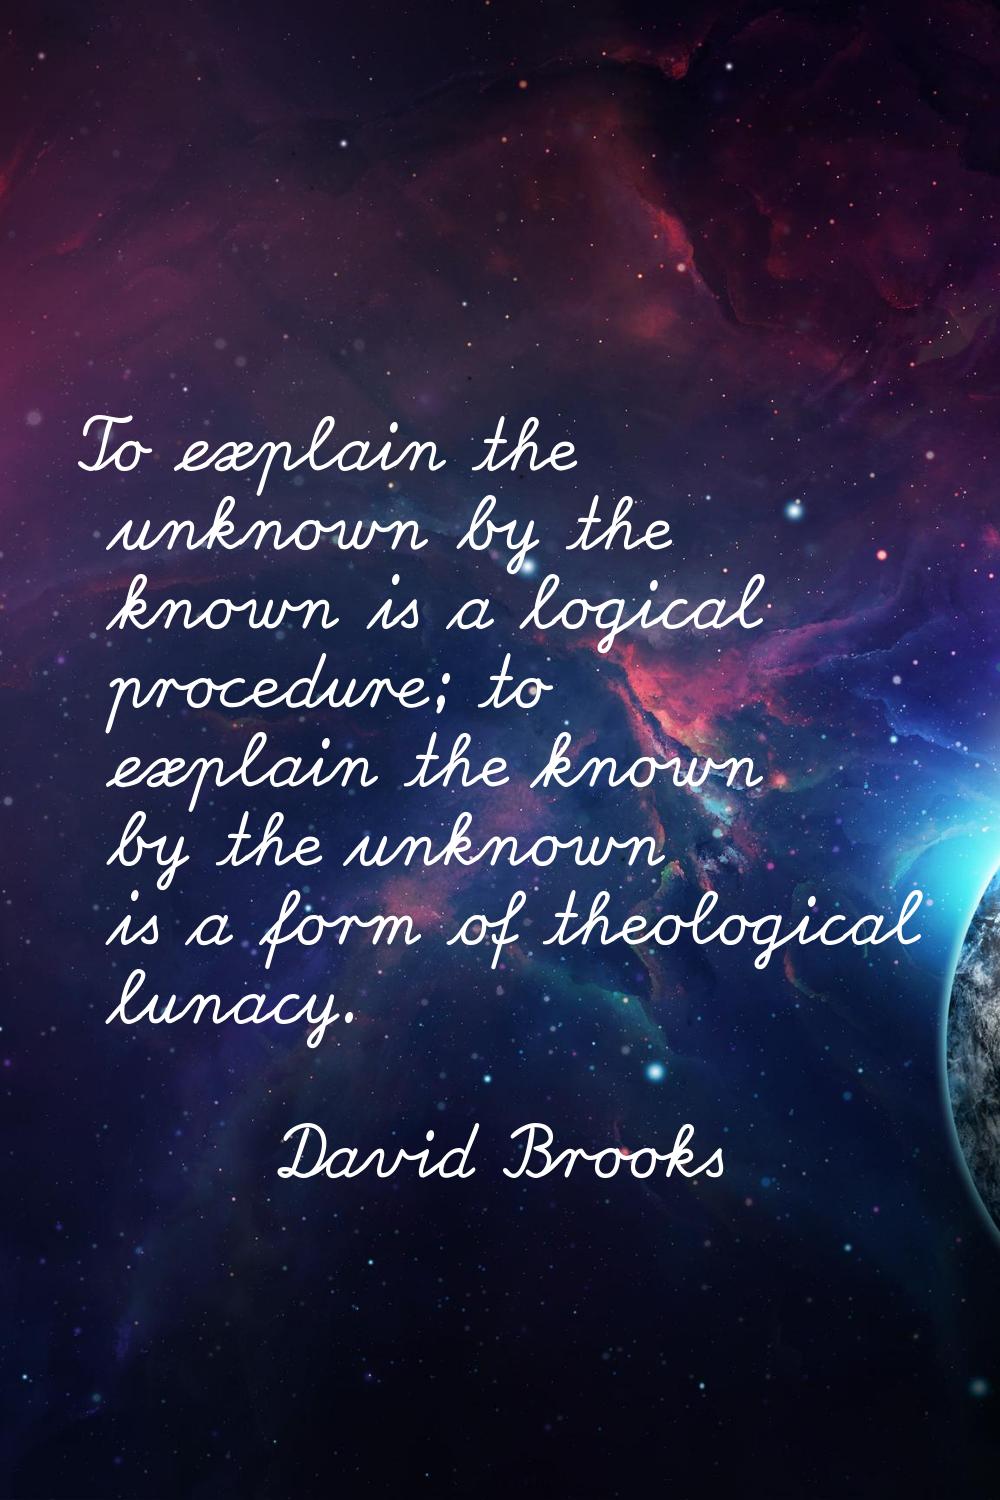 To explain the unknown by the known is a logical procedure; to explain the known by the unknown is 